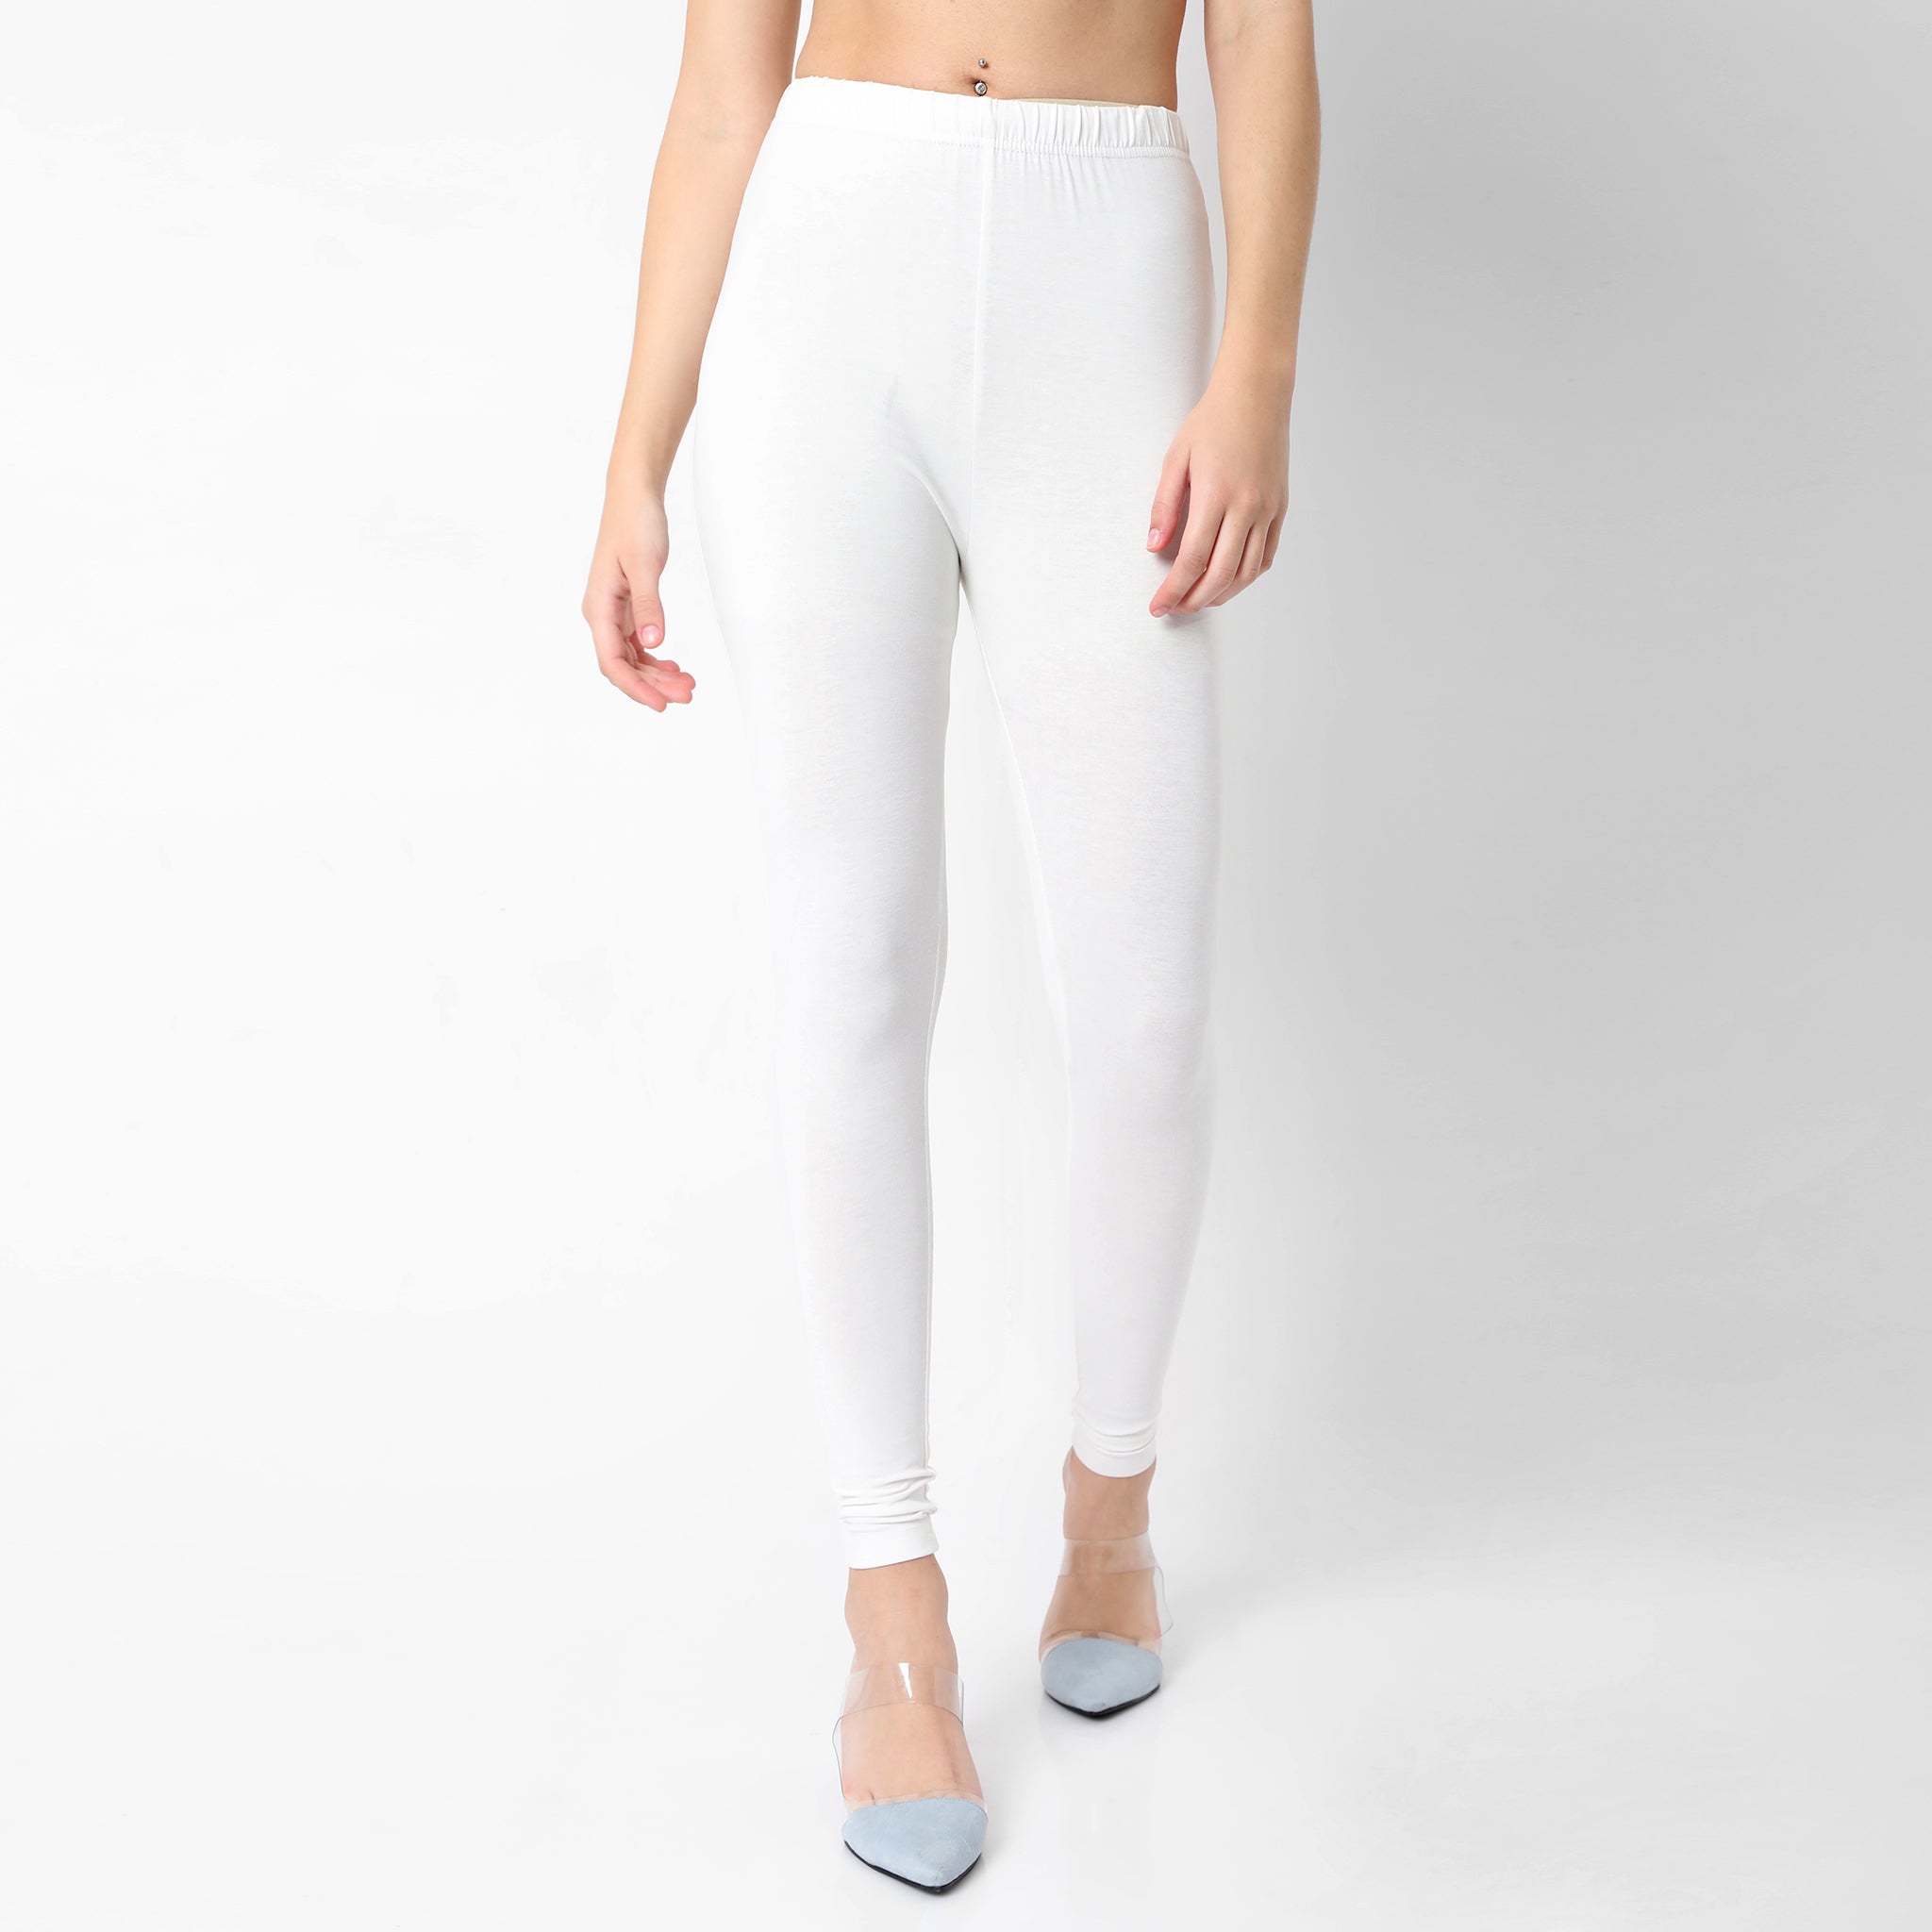 Mid Waist White leggings, Casual Wear, Slim Fit at Rs 180 in